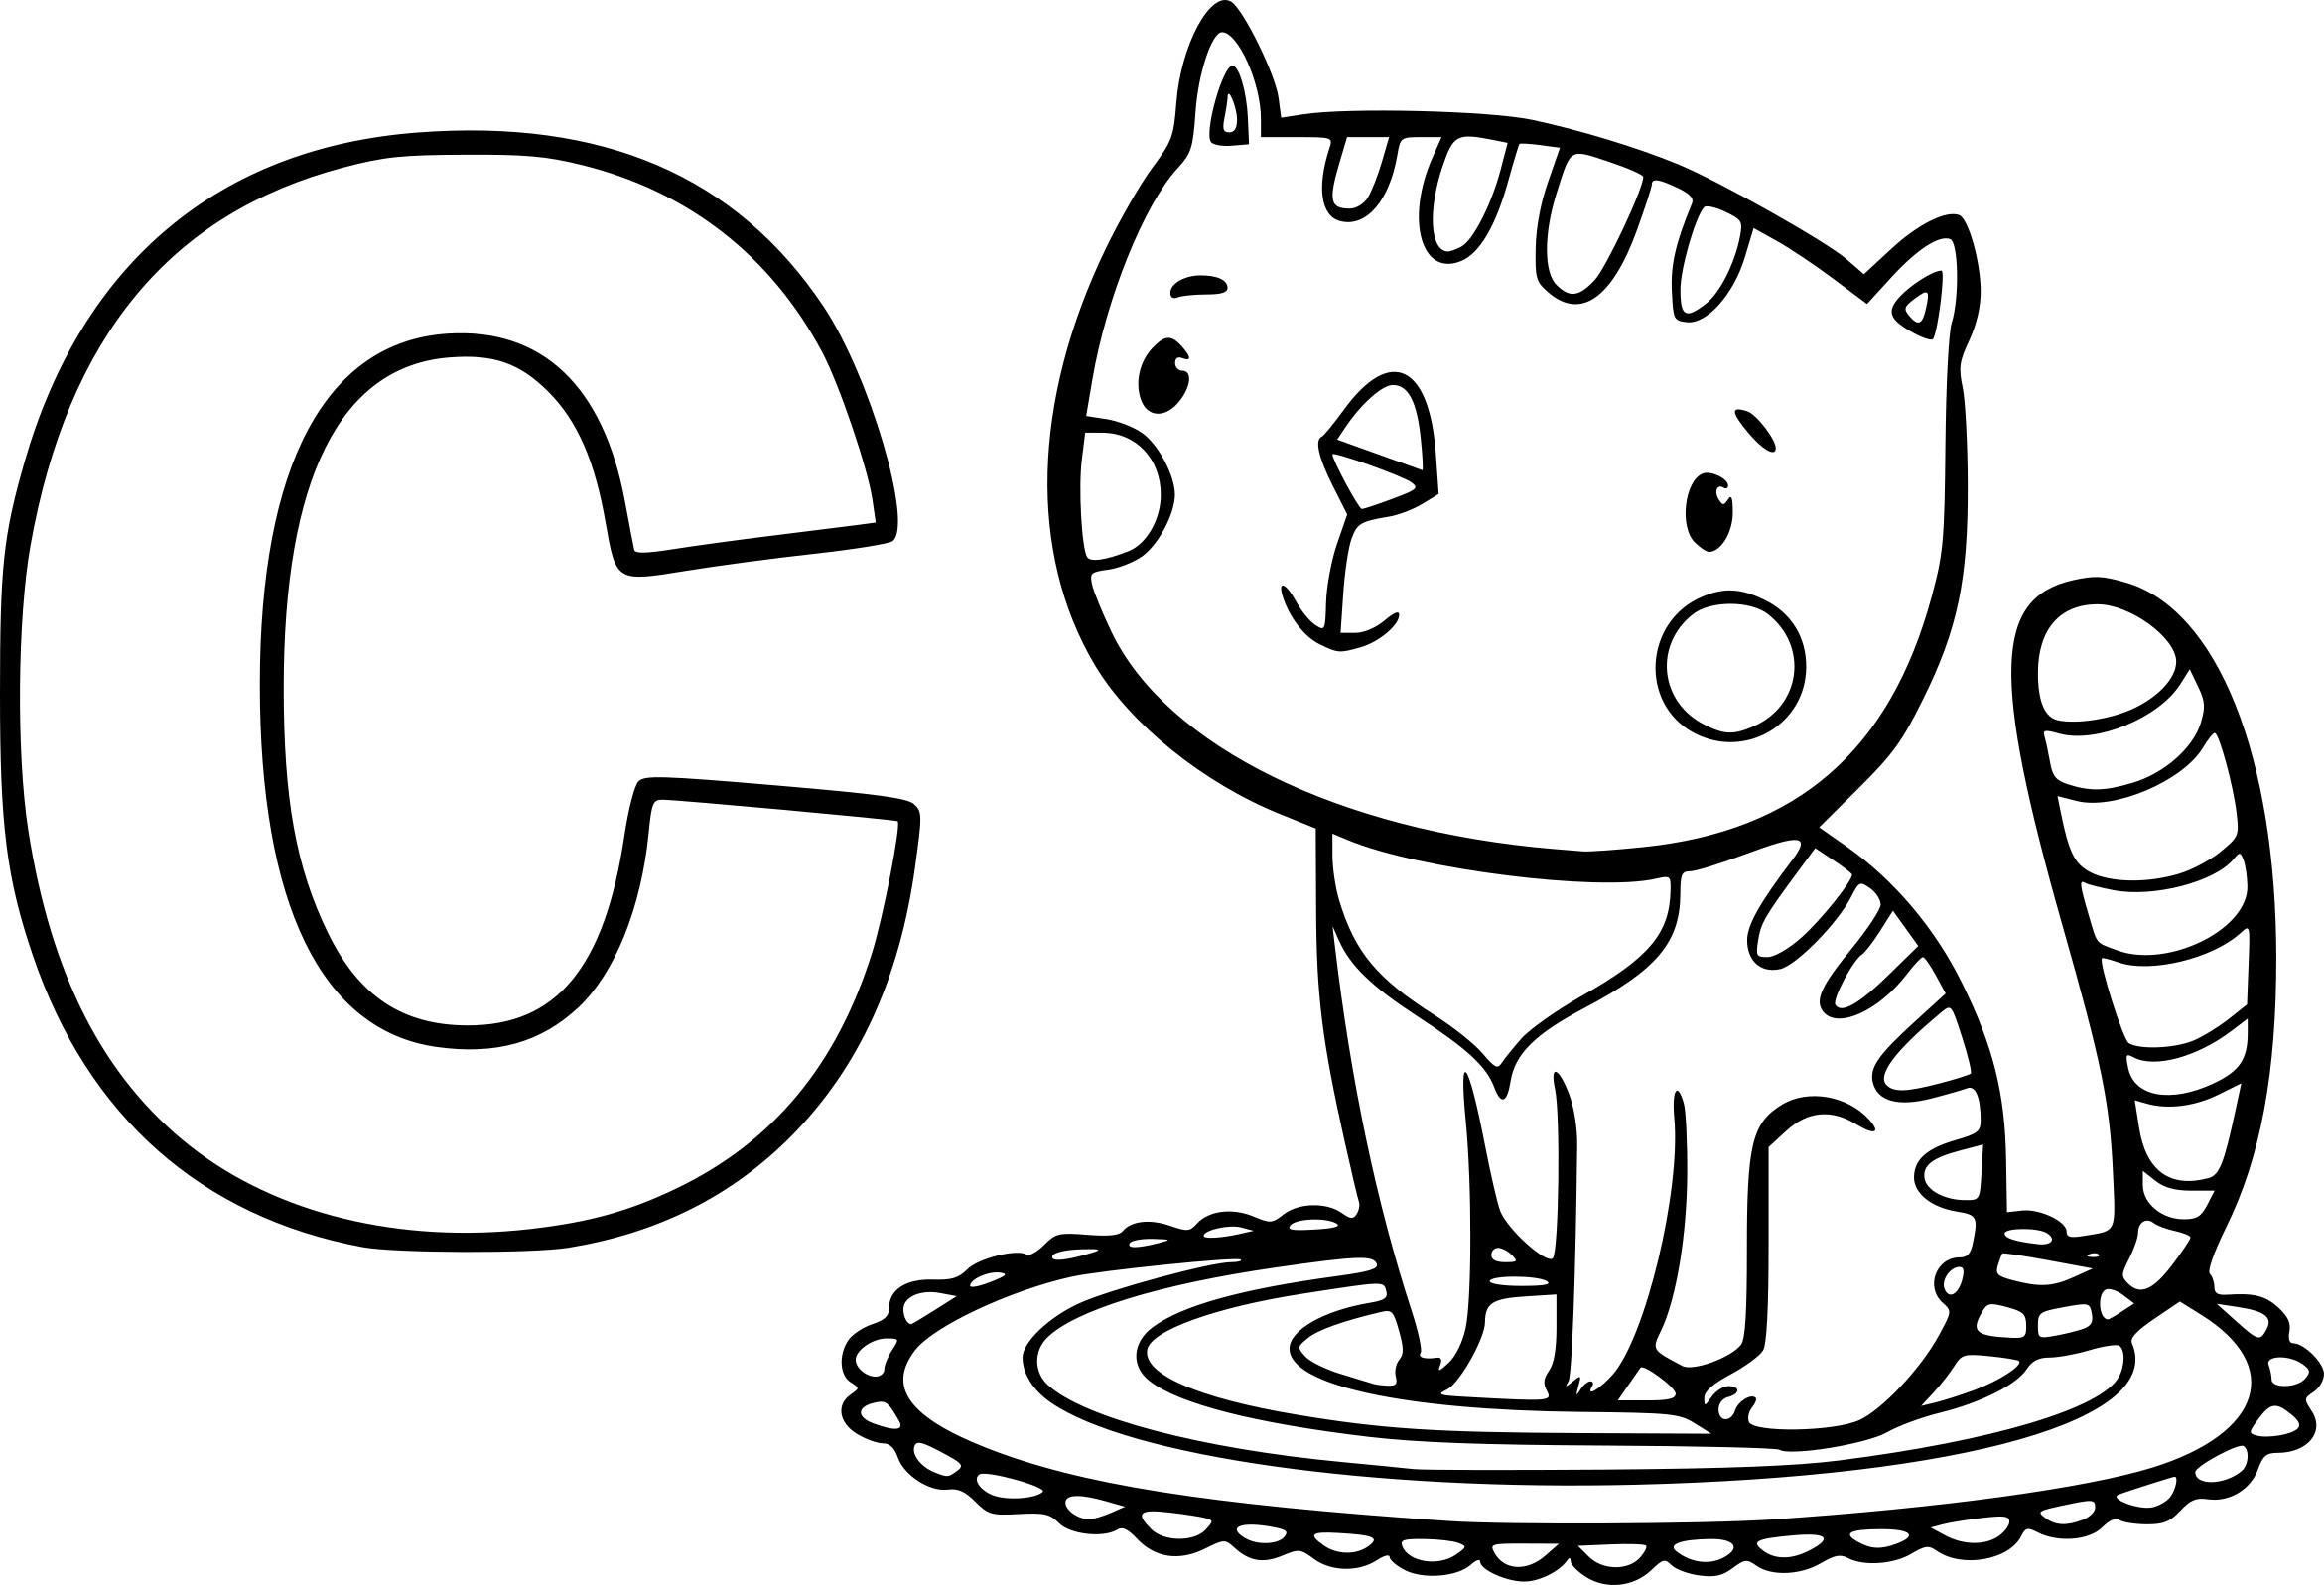 C For Cat coloring page